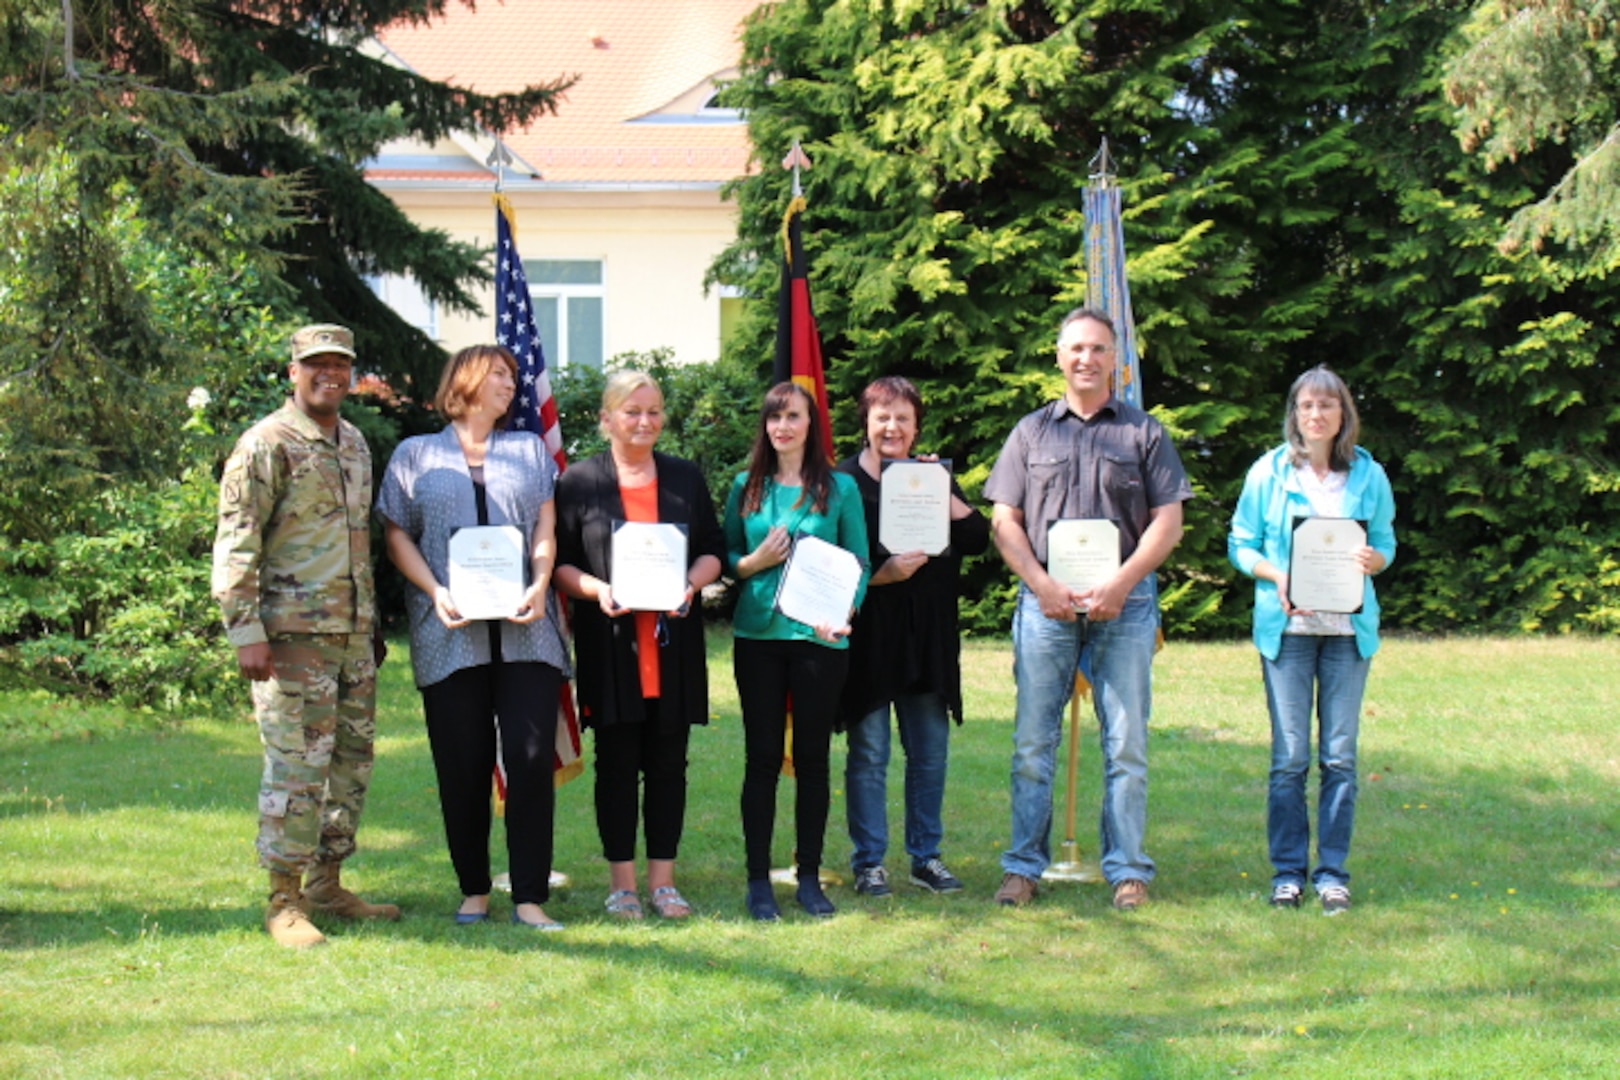 DLA Troop Support Europe & Africa employees recognized for excellence